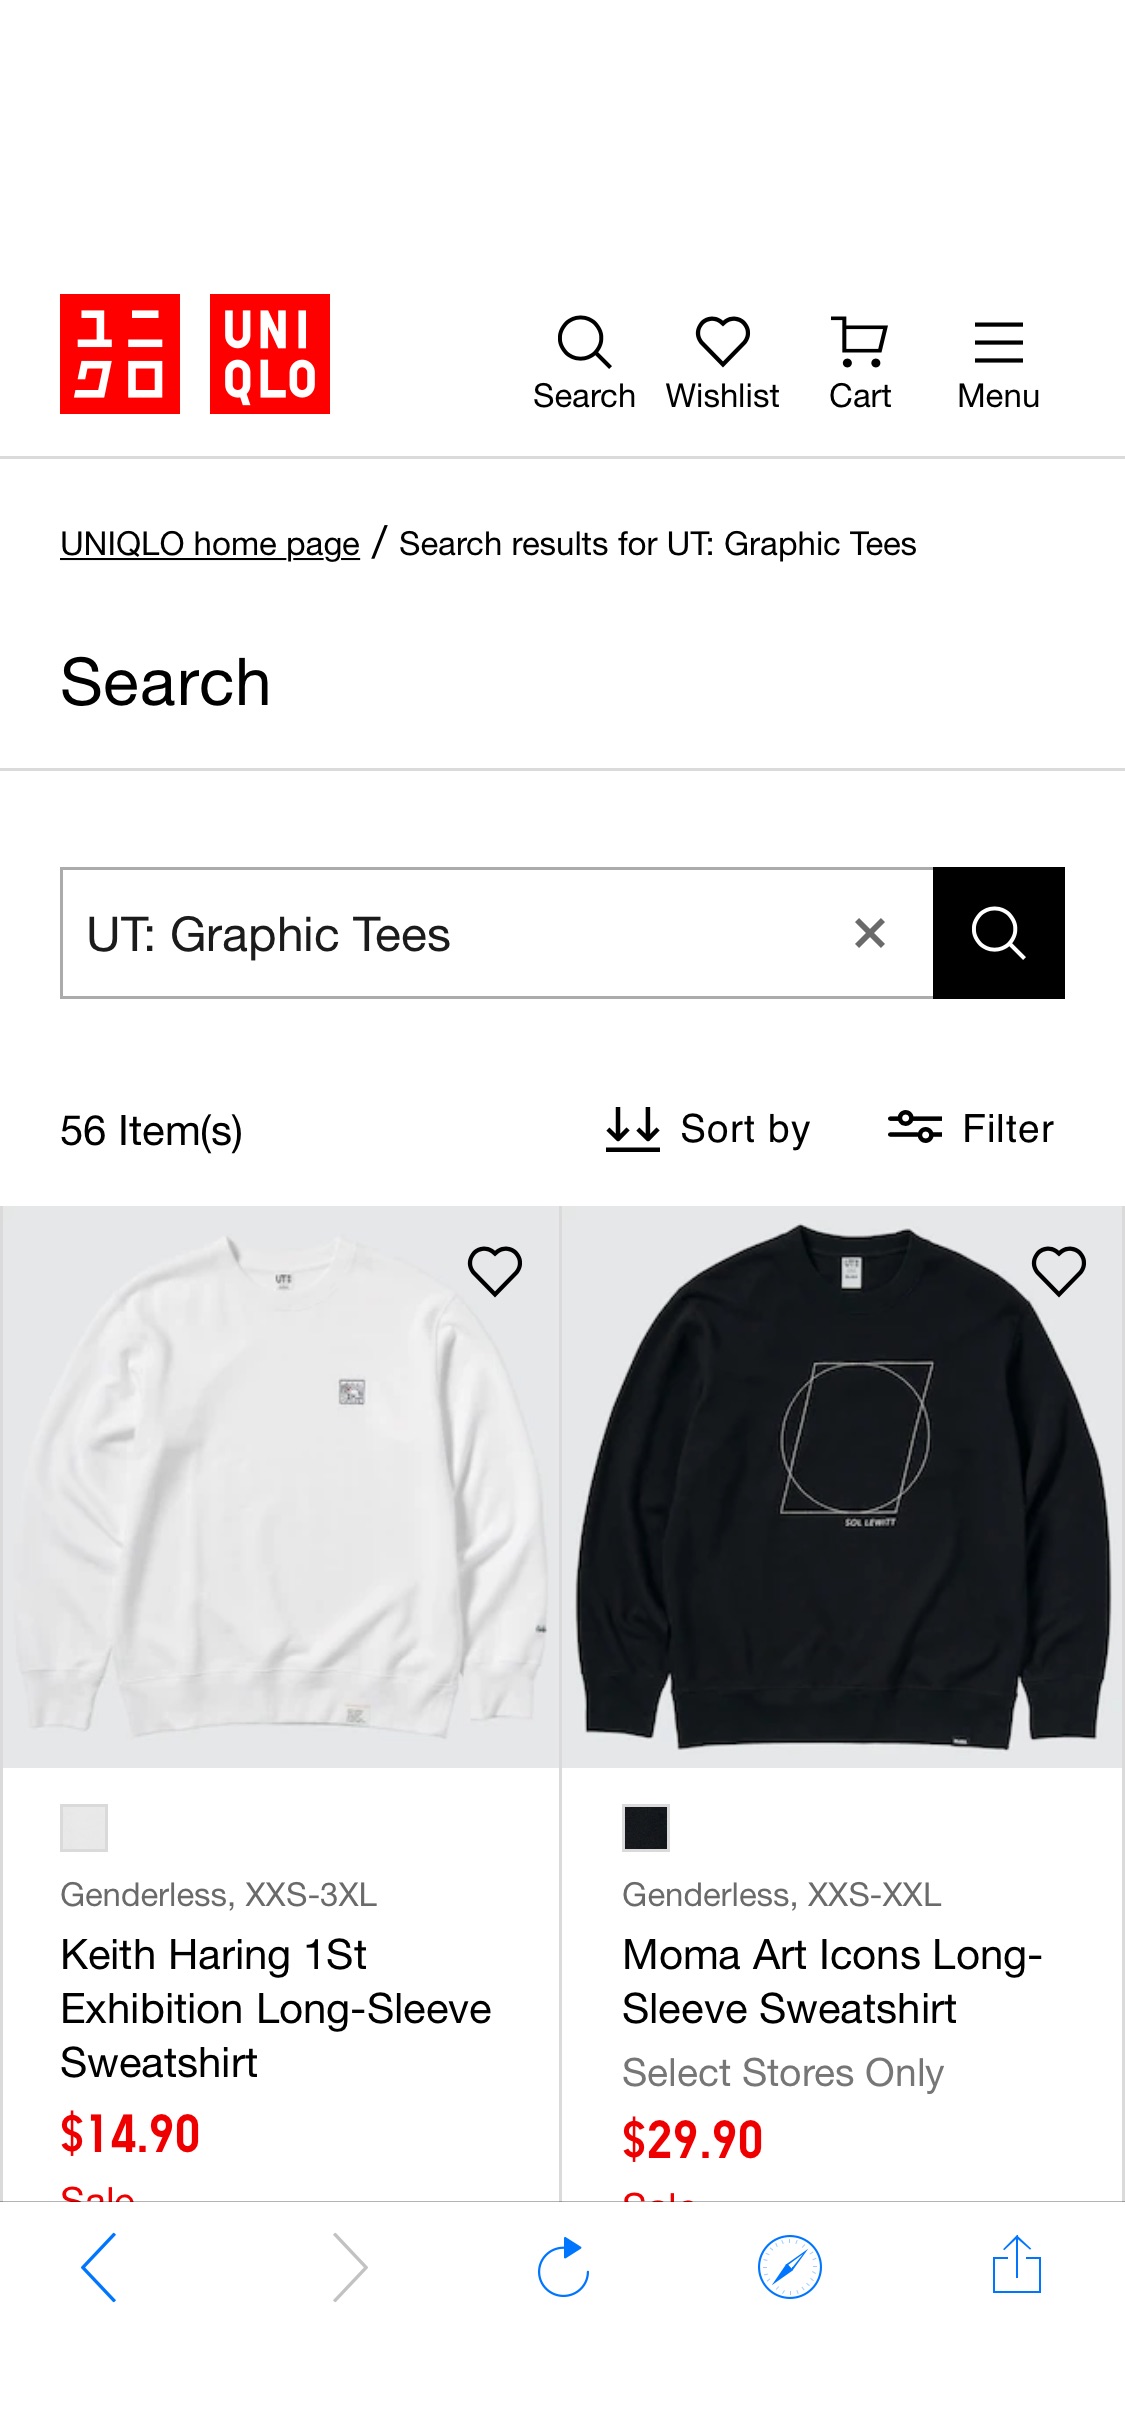 Search results for UT: Graphic Tees | UNIQLO US低至五折